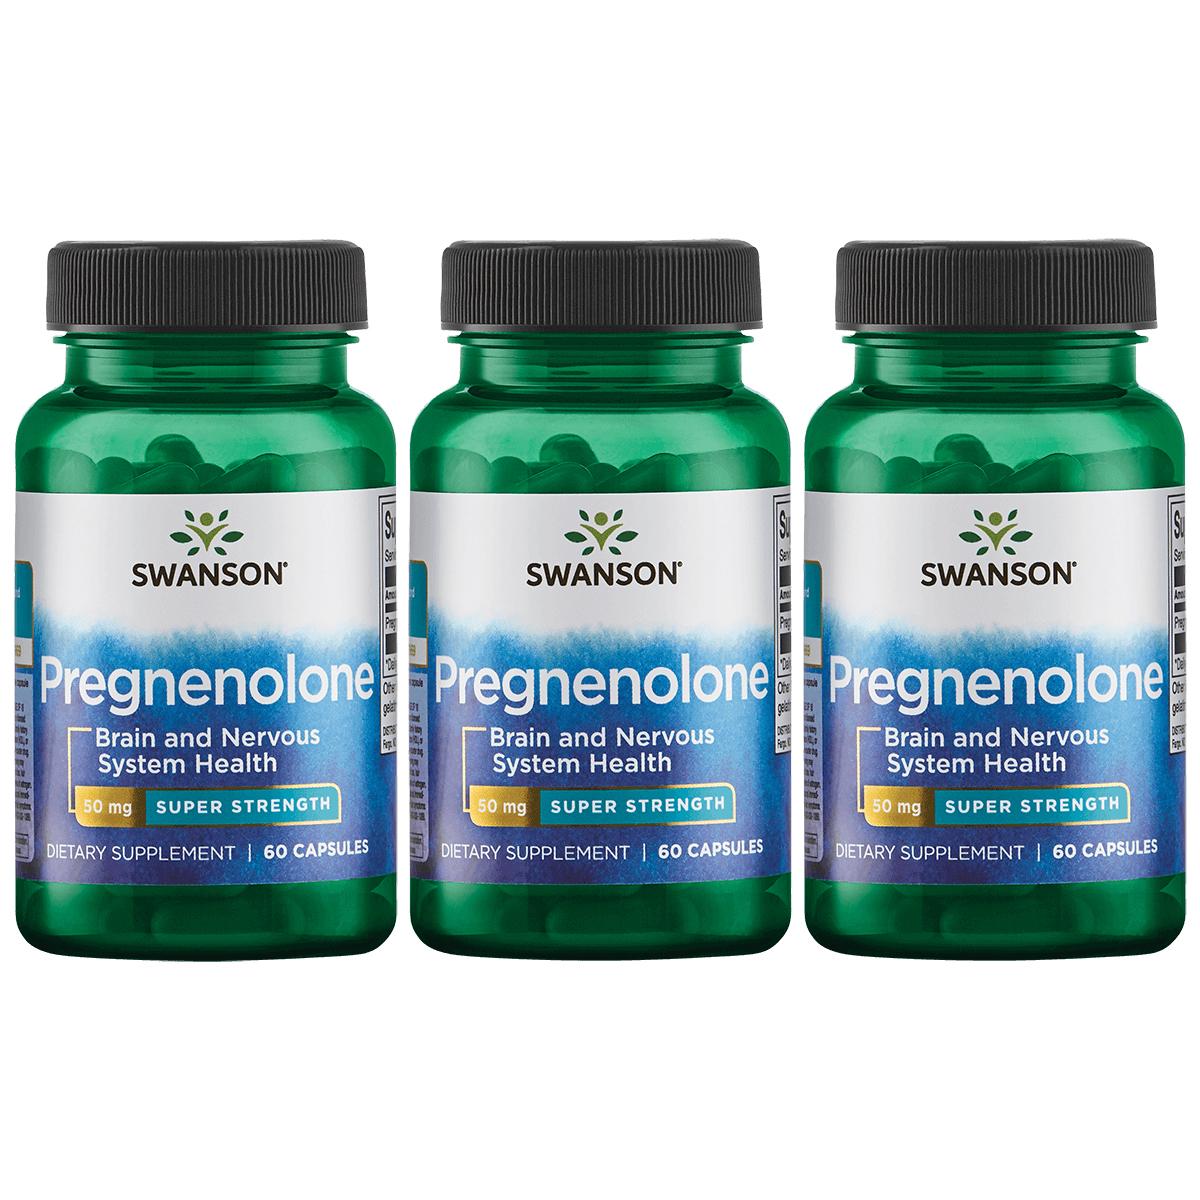 Swanson Ultra Pregnenolone - Super Strength 3 Pack Supplement Vitamin 50 mg 60 Caps